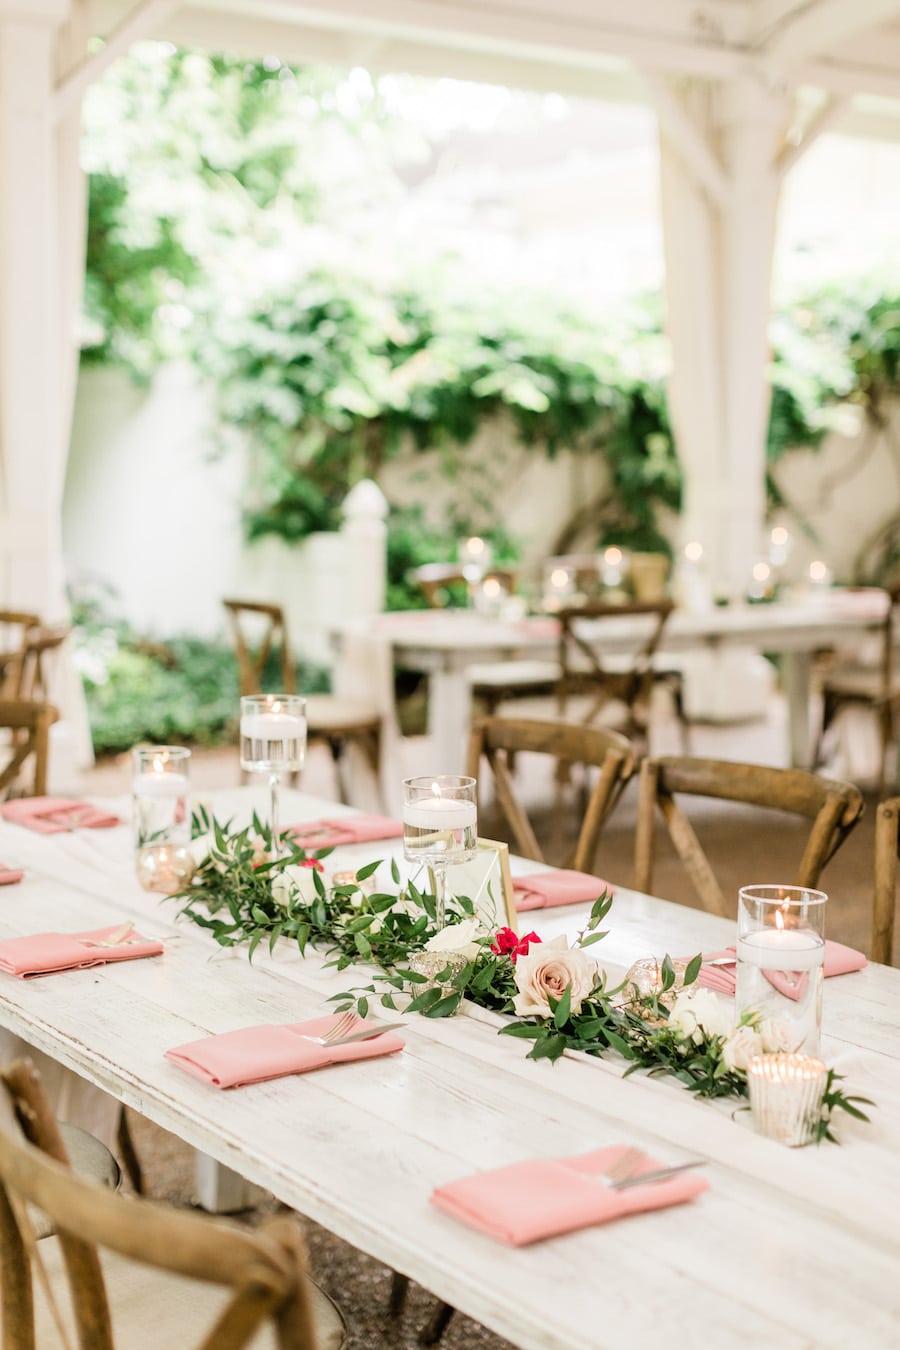 Nashville wedding venue that’s perfect for outdoor ceremony and reception with sage green and blush